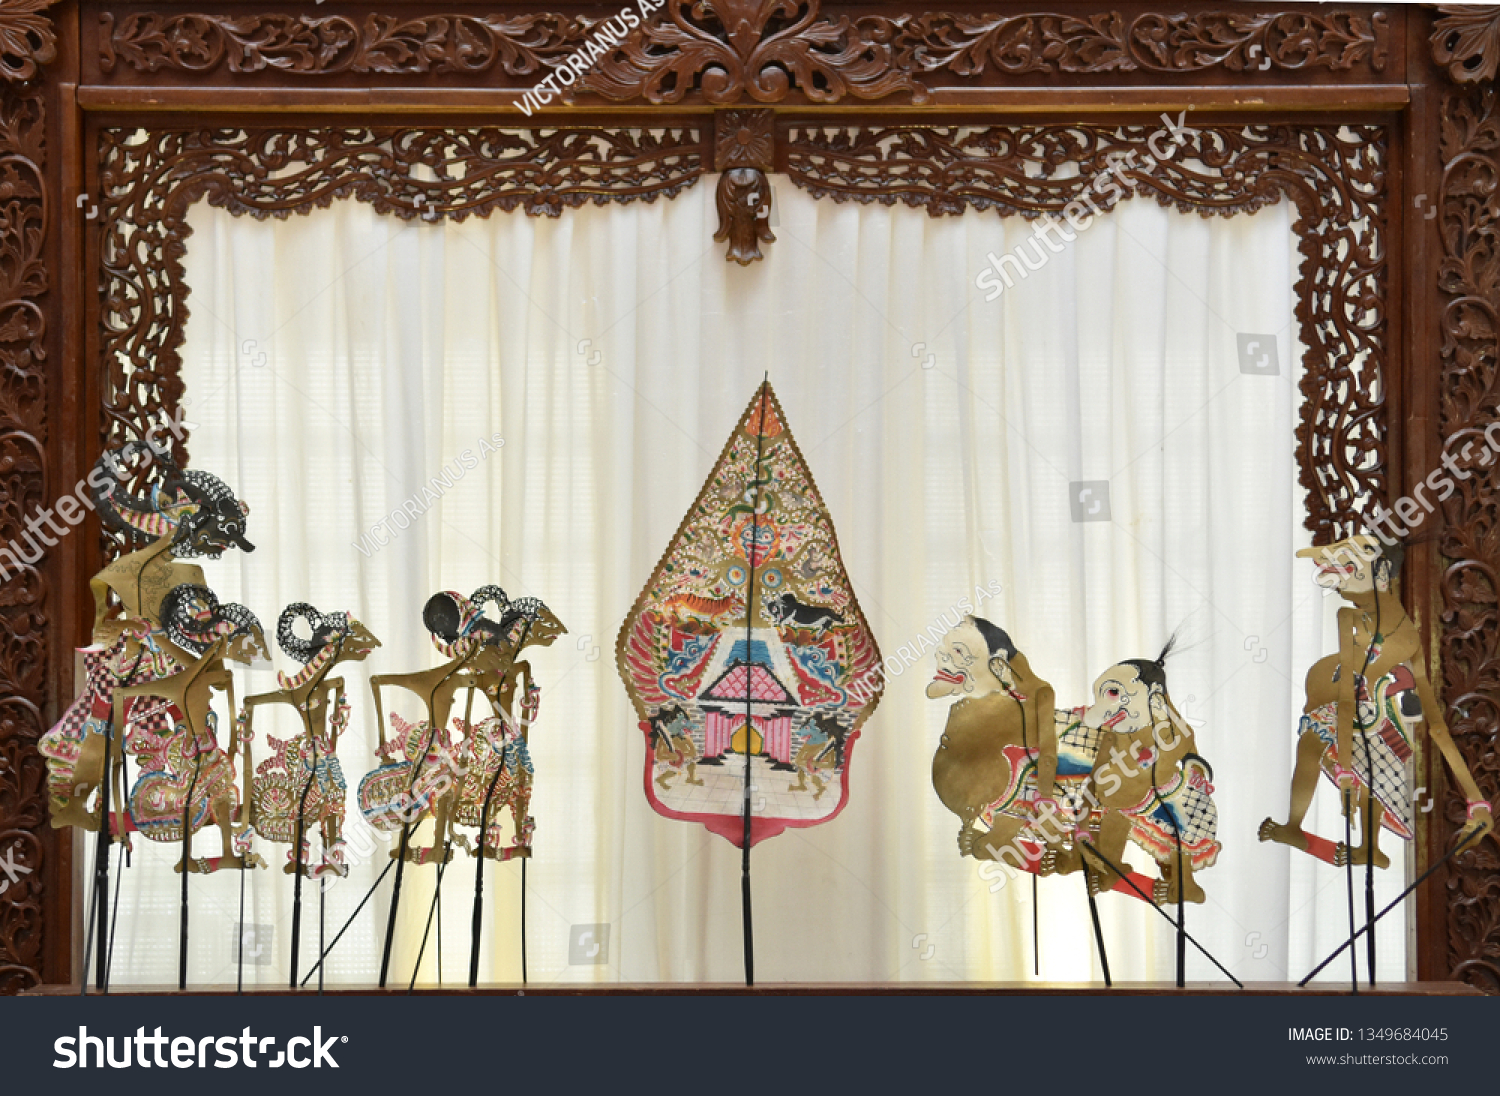  The image shows a collection of intricately designed wayang kulit (leather shadow puppets), depicting various mythological figures from the Hindu epic Mahabharata and Ramayana, displayed against a white backdrop with a wooden frame.